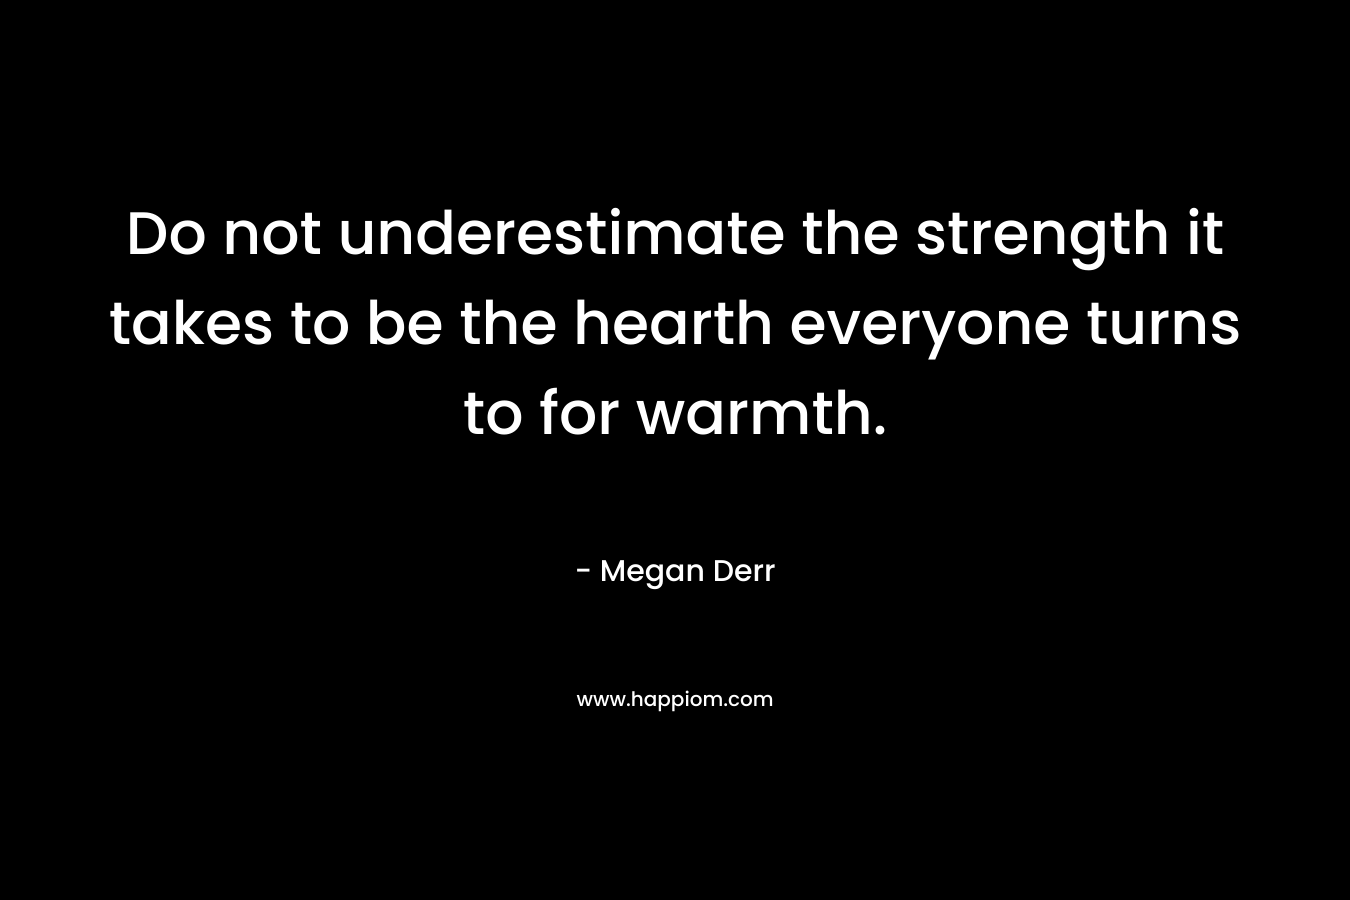 Do not underestimate the strength it takes to be the hearth everyone turns to for warmth. – Megan Derr